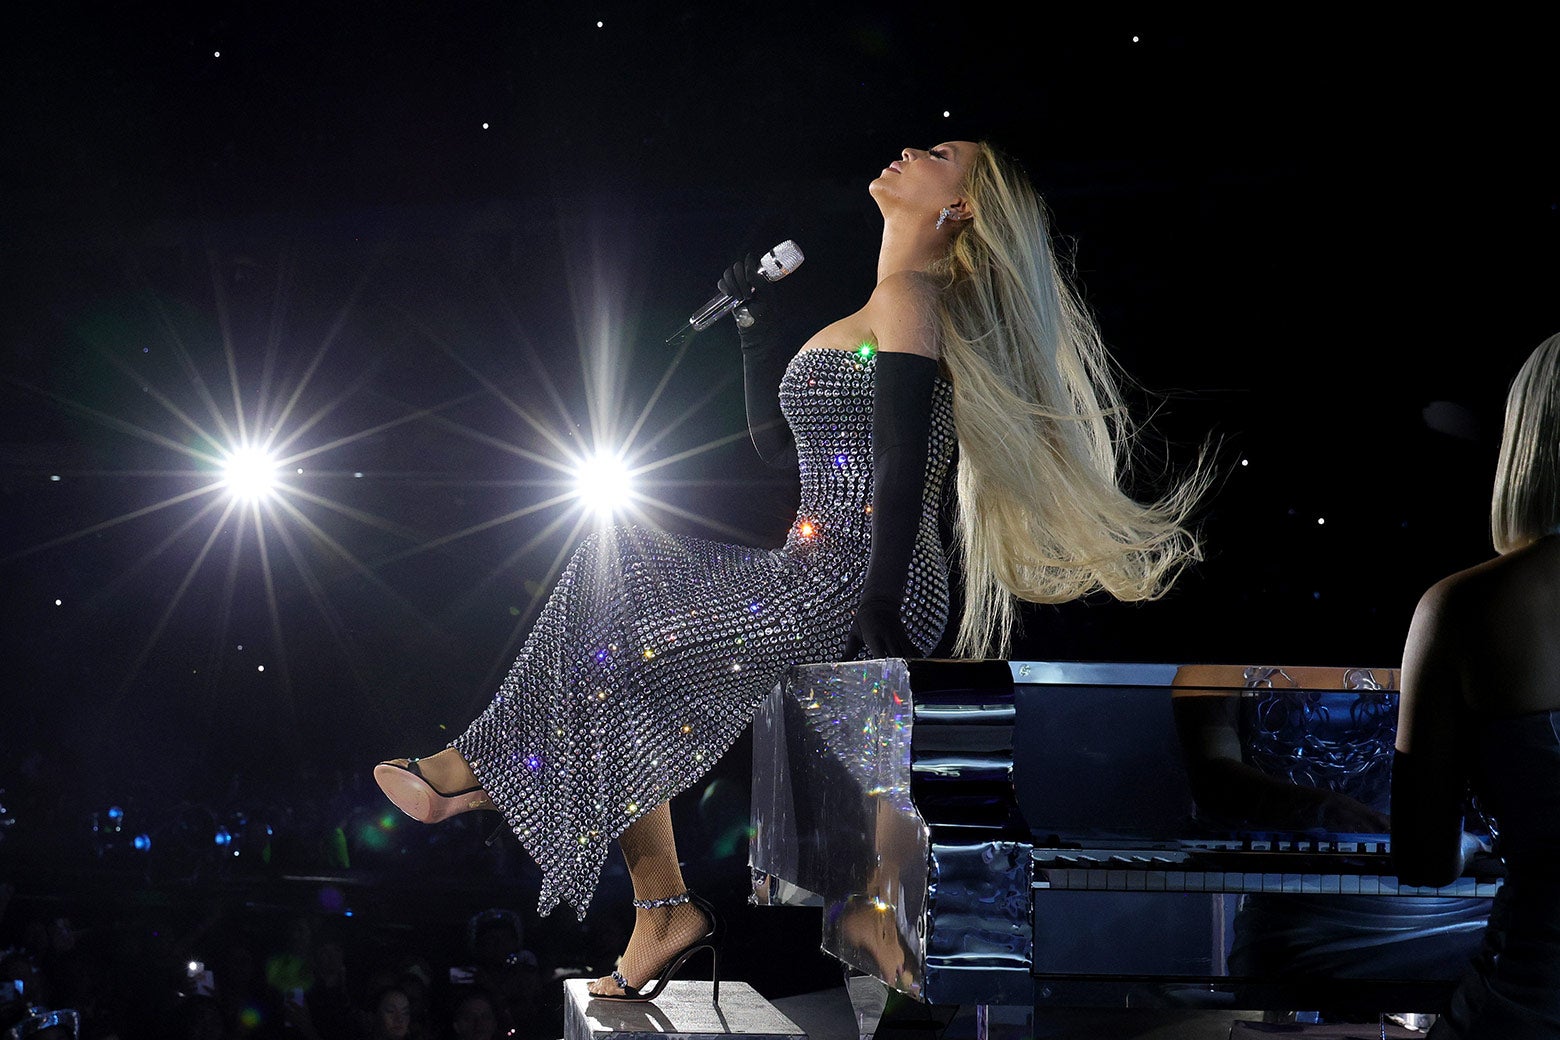 Beyoncé dressed in a glittery gown, sitting on a piano onstage.